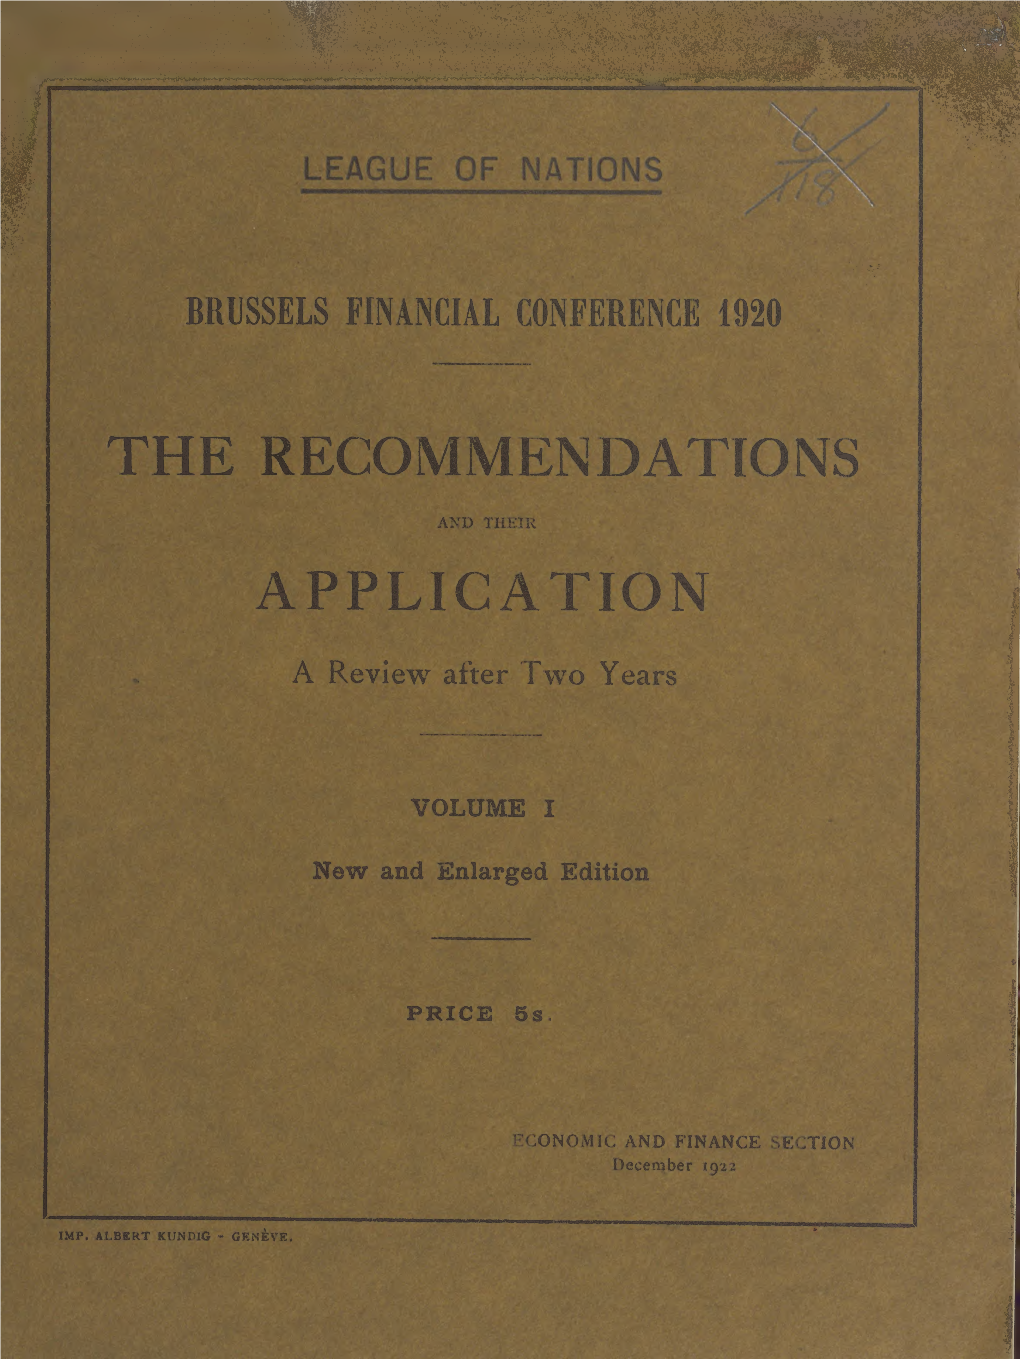 The Recommendations Application